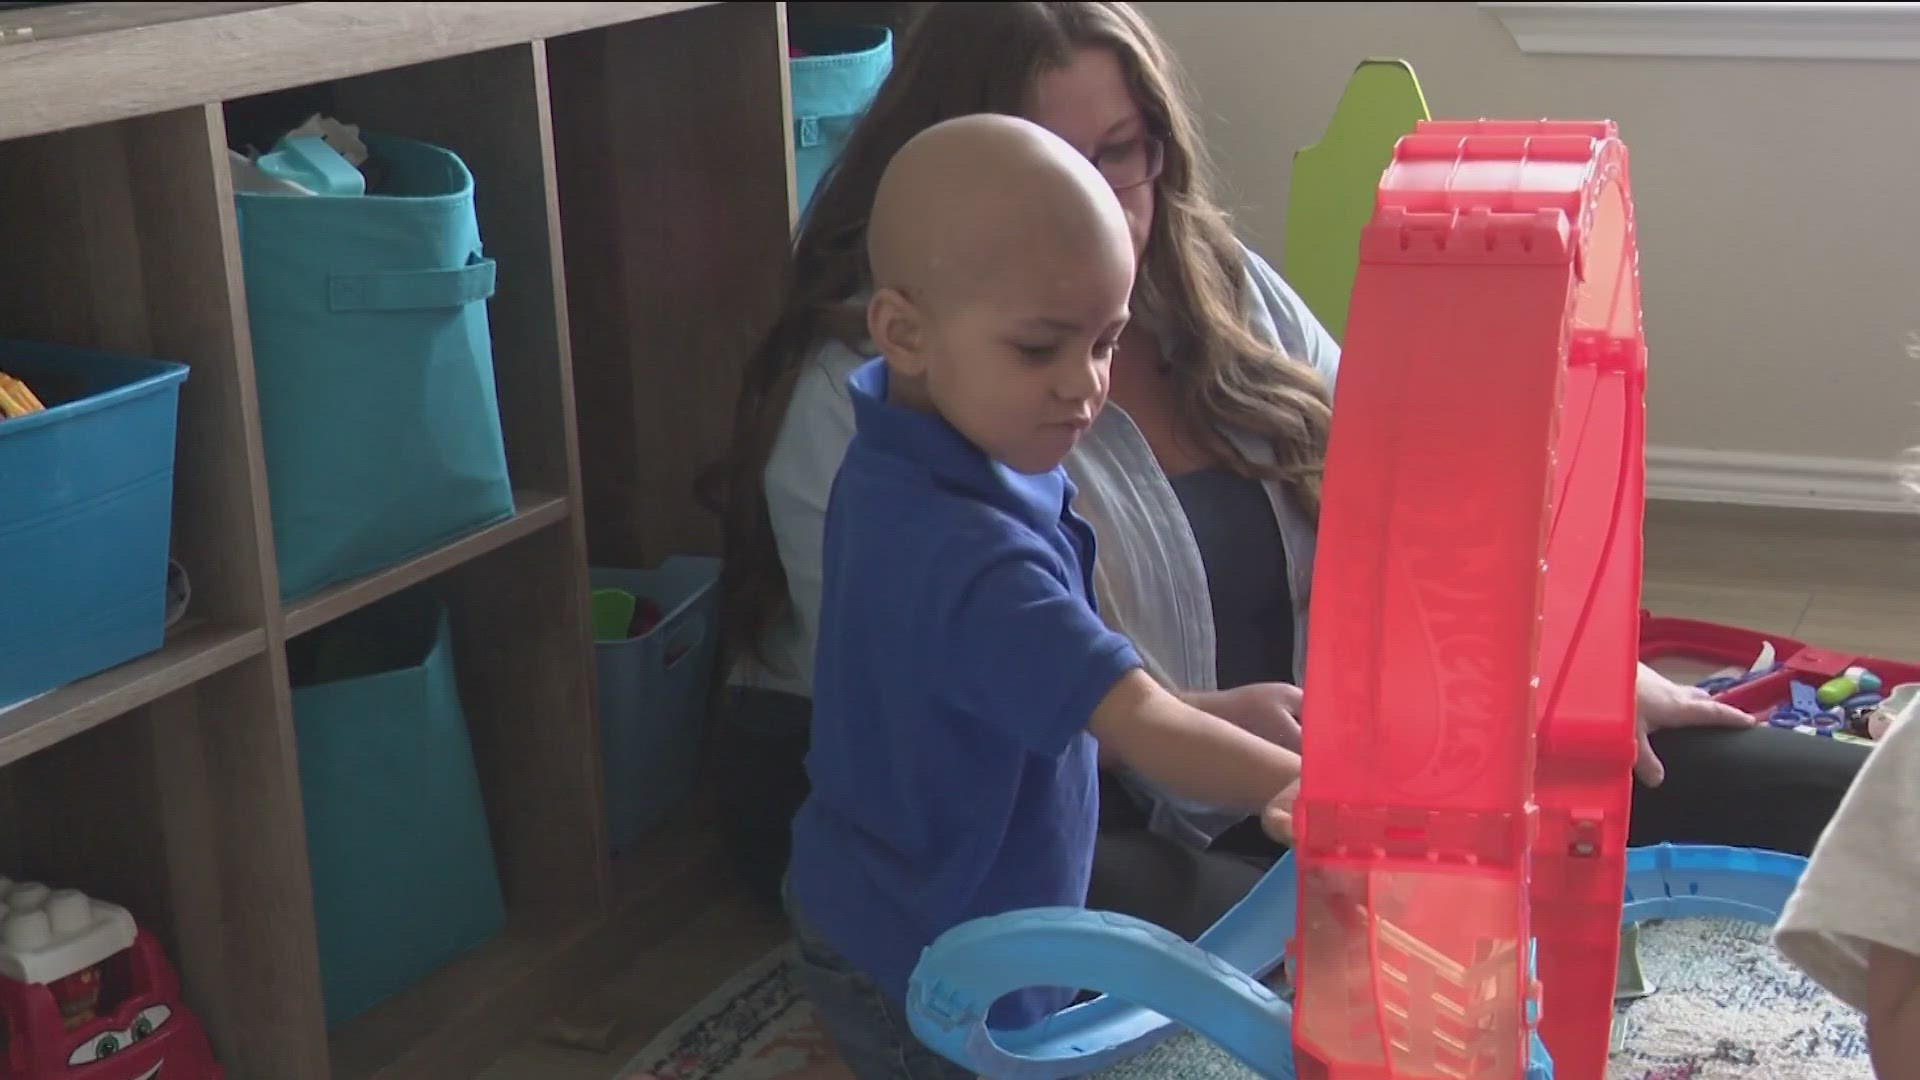 Xander Keith was first diagnosed with Stage 4 Neuroblastoma at 10 weeks old. Years after being in remission, the cancer has returned.